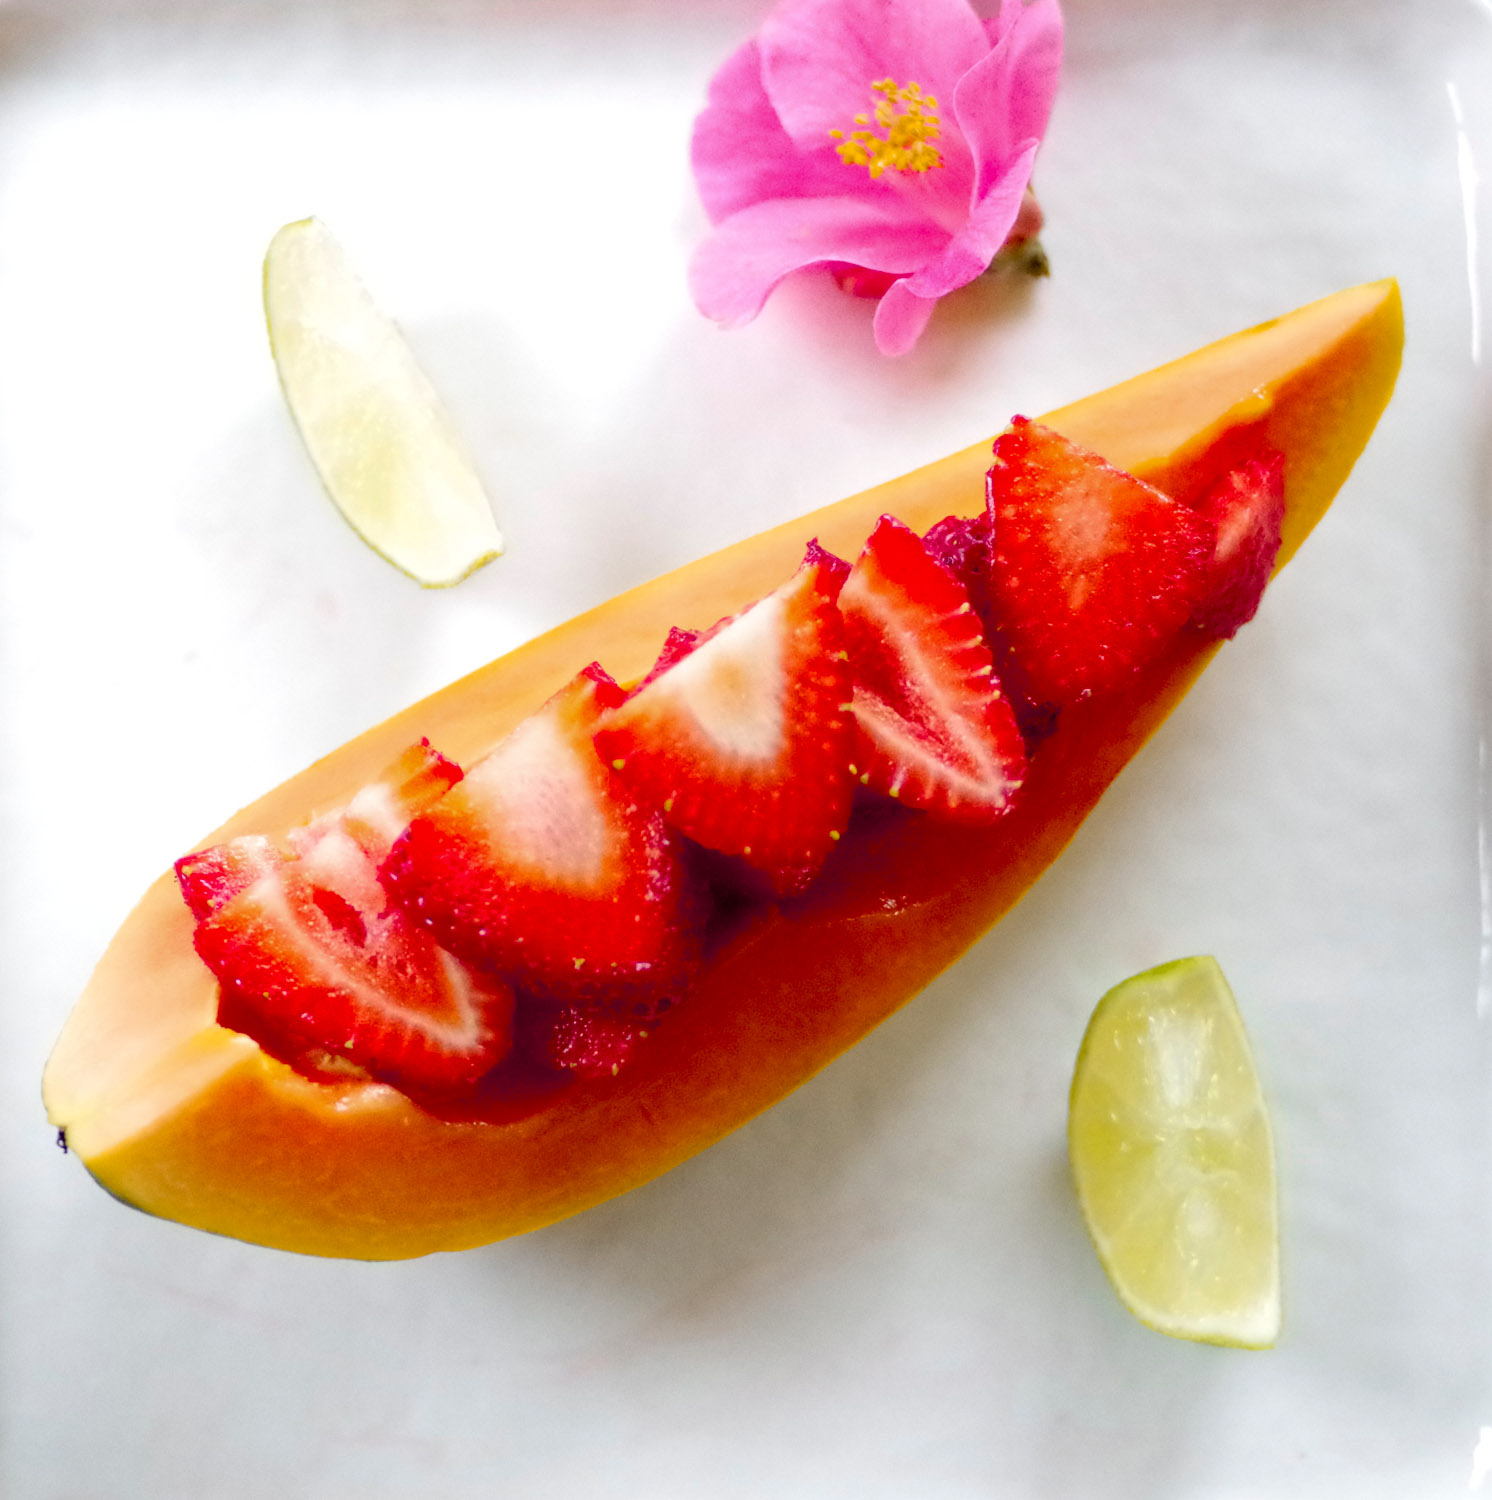 Strawberry papaya boat. The papaya's flavor comes alive when lime is squeezed over it.